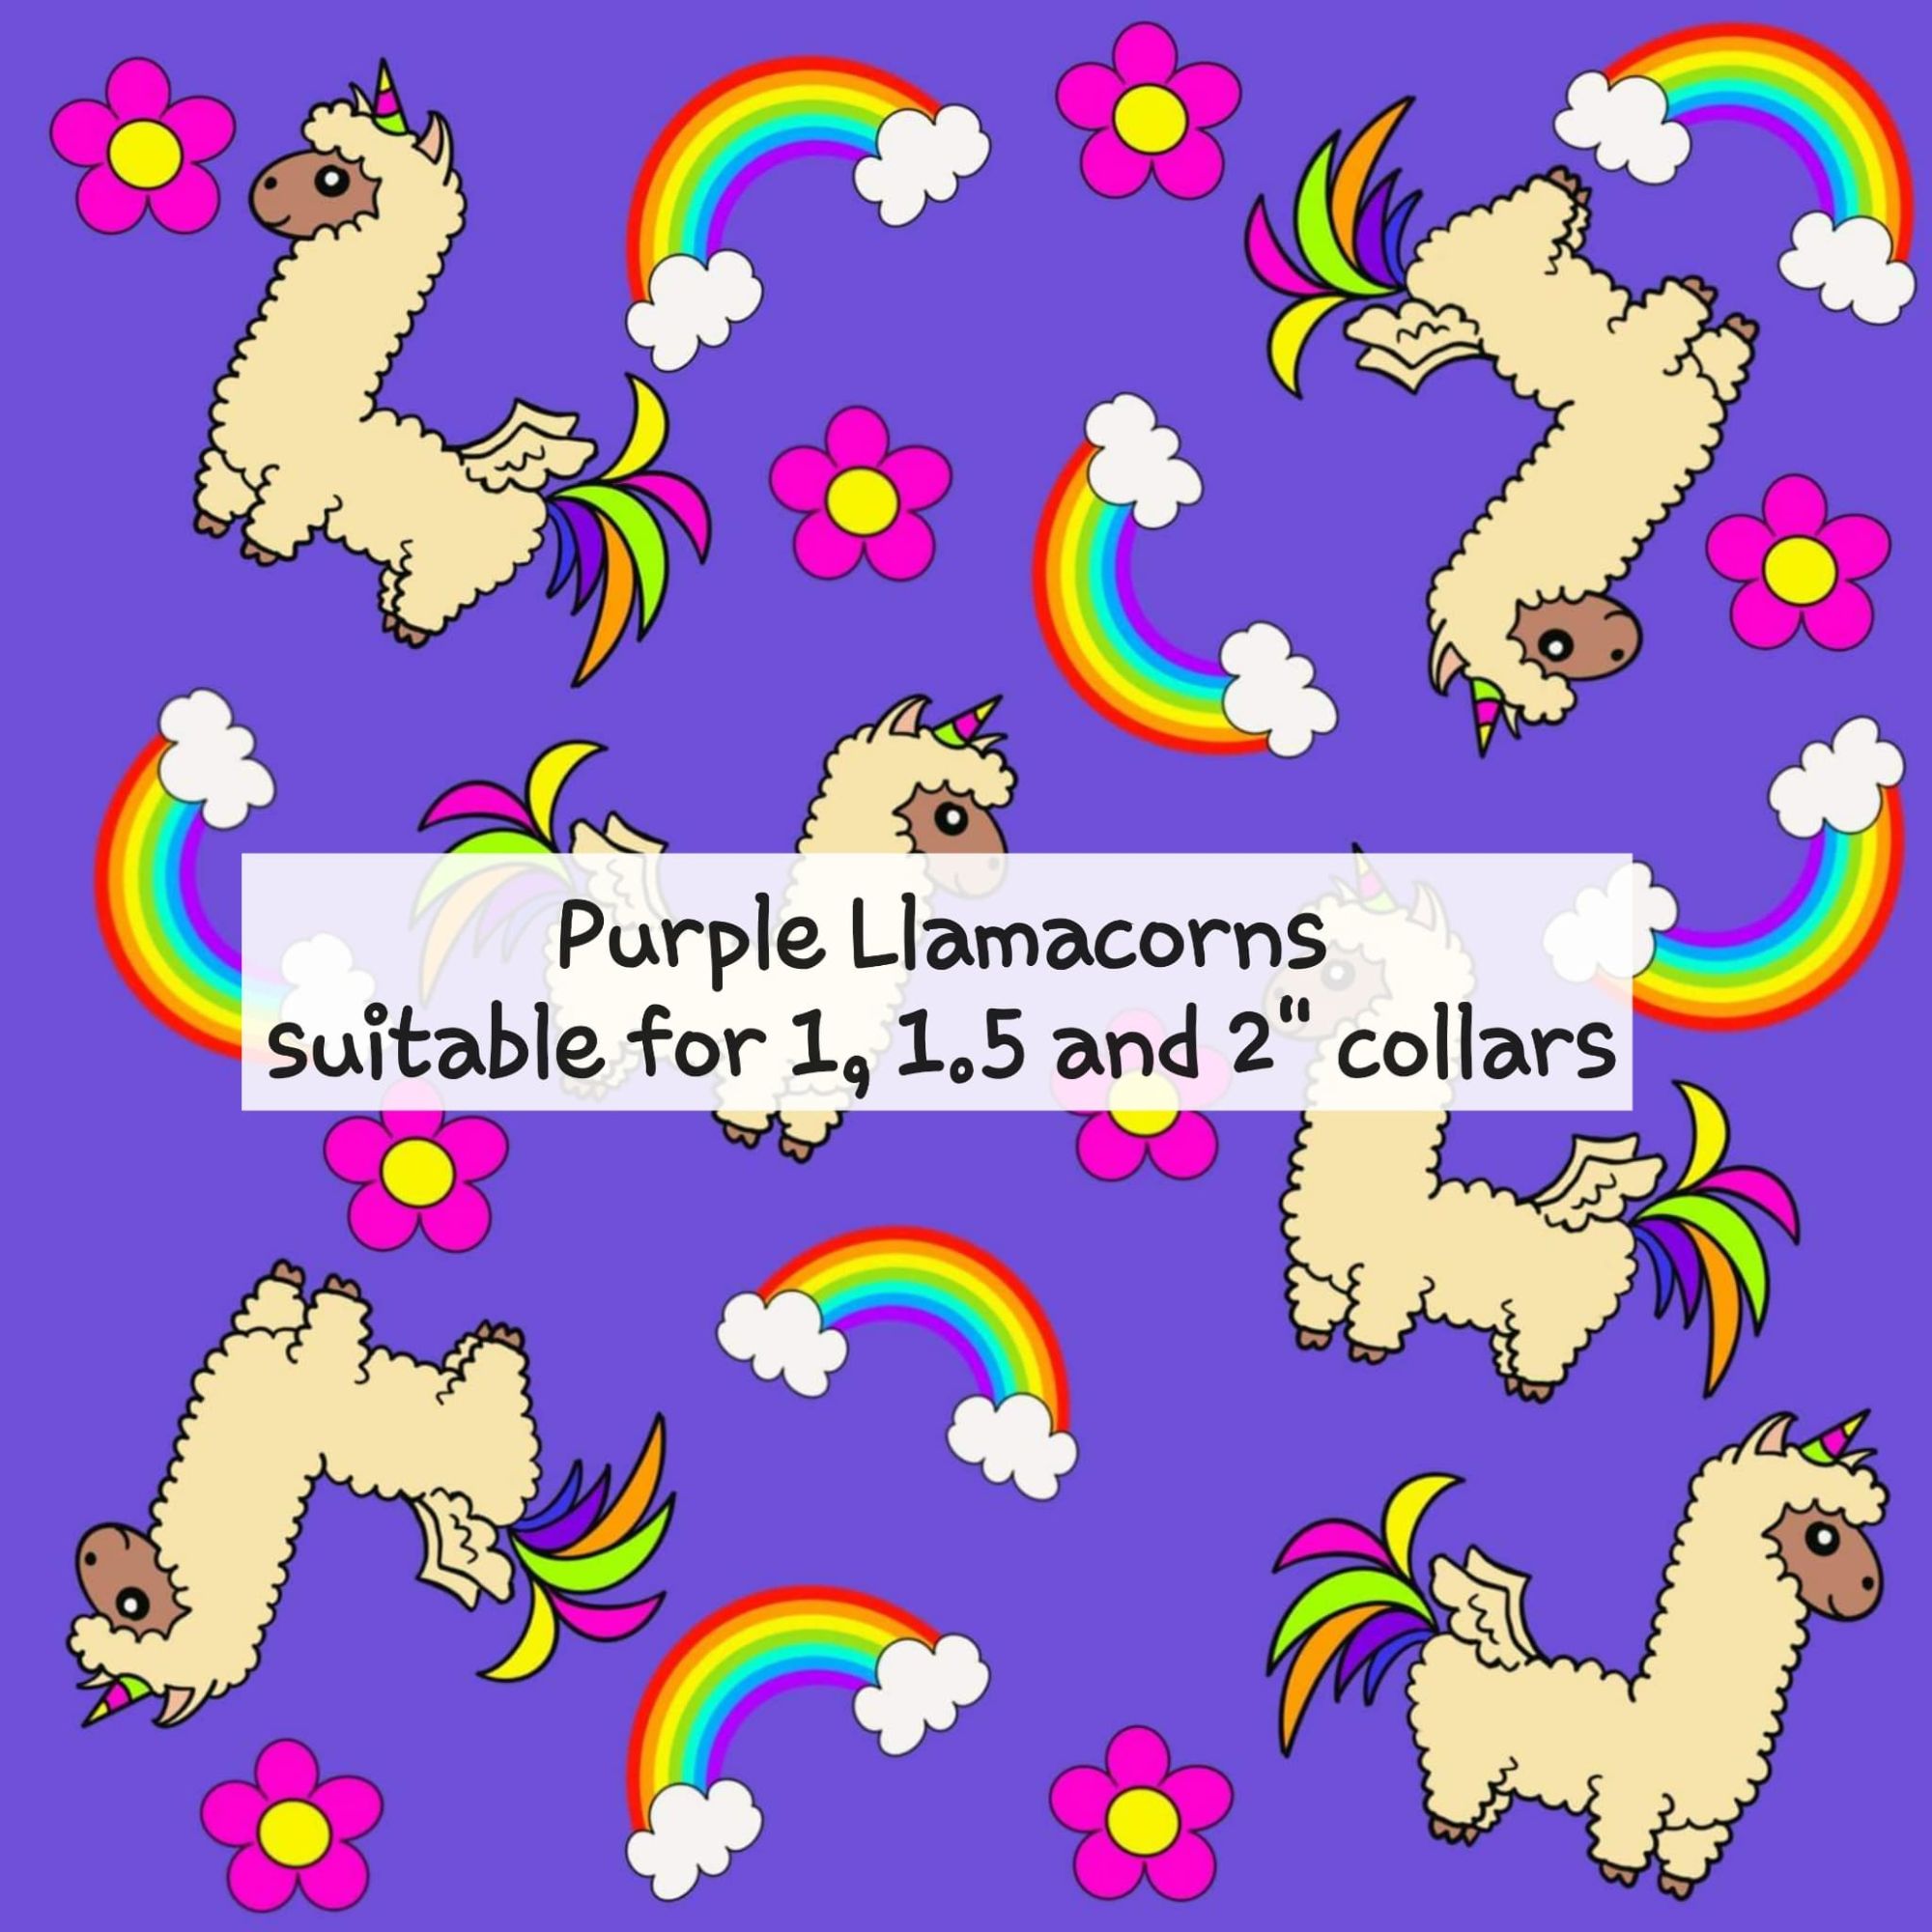 Purple Llamacorns - Suitable for 1, 1.5 and 2 inch collars